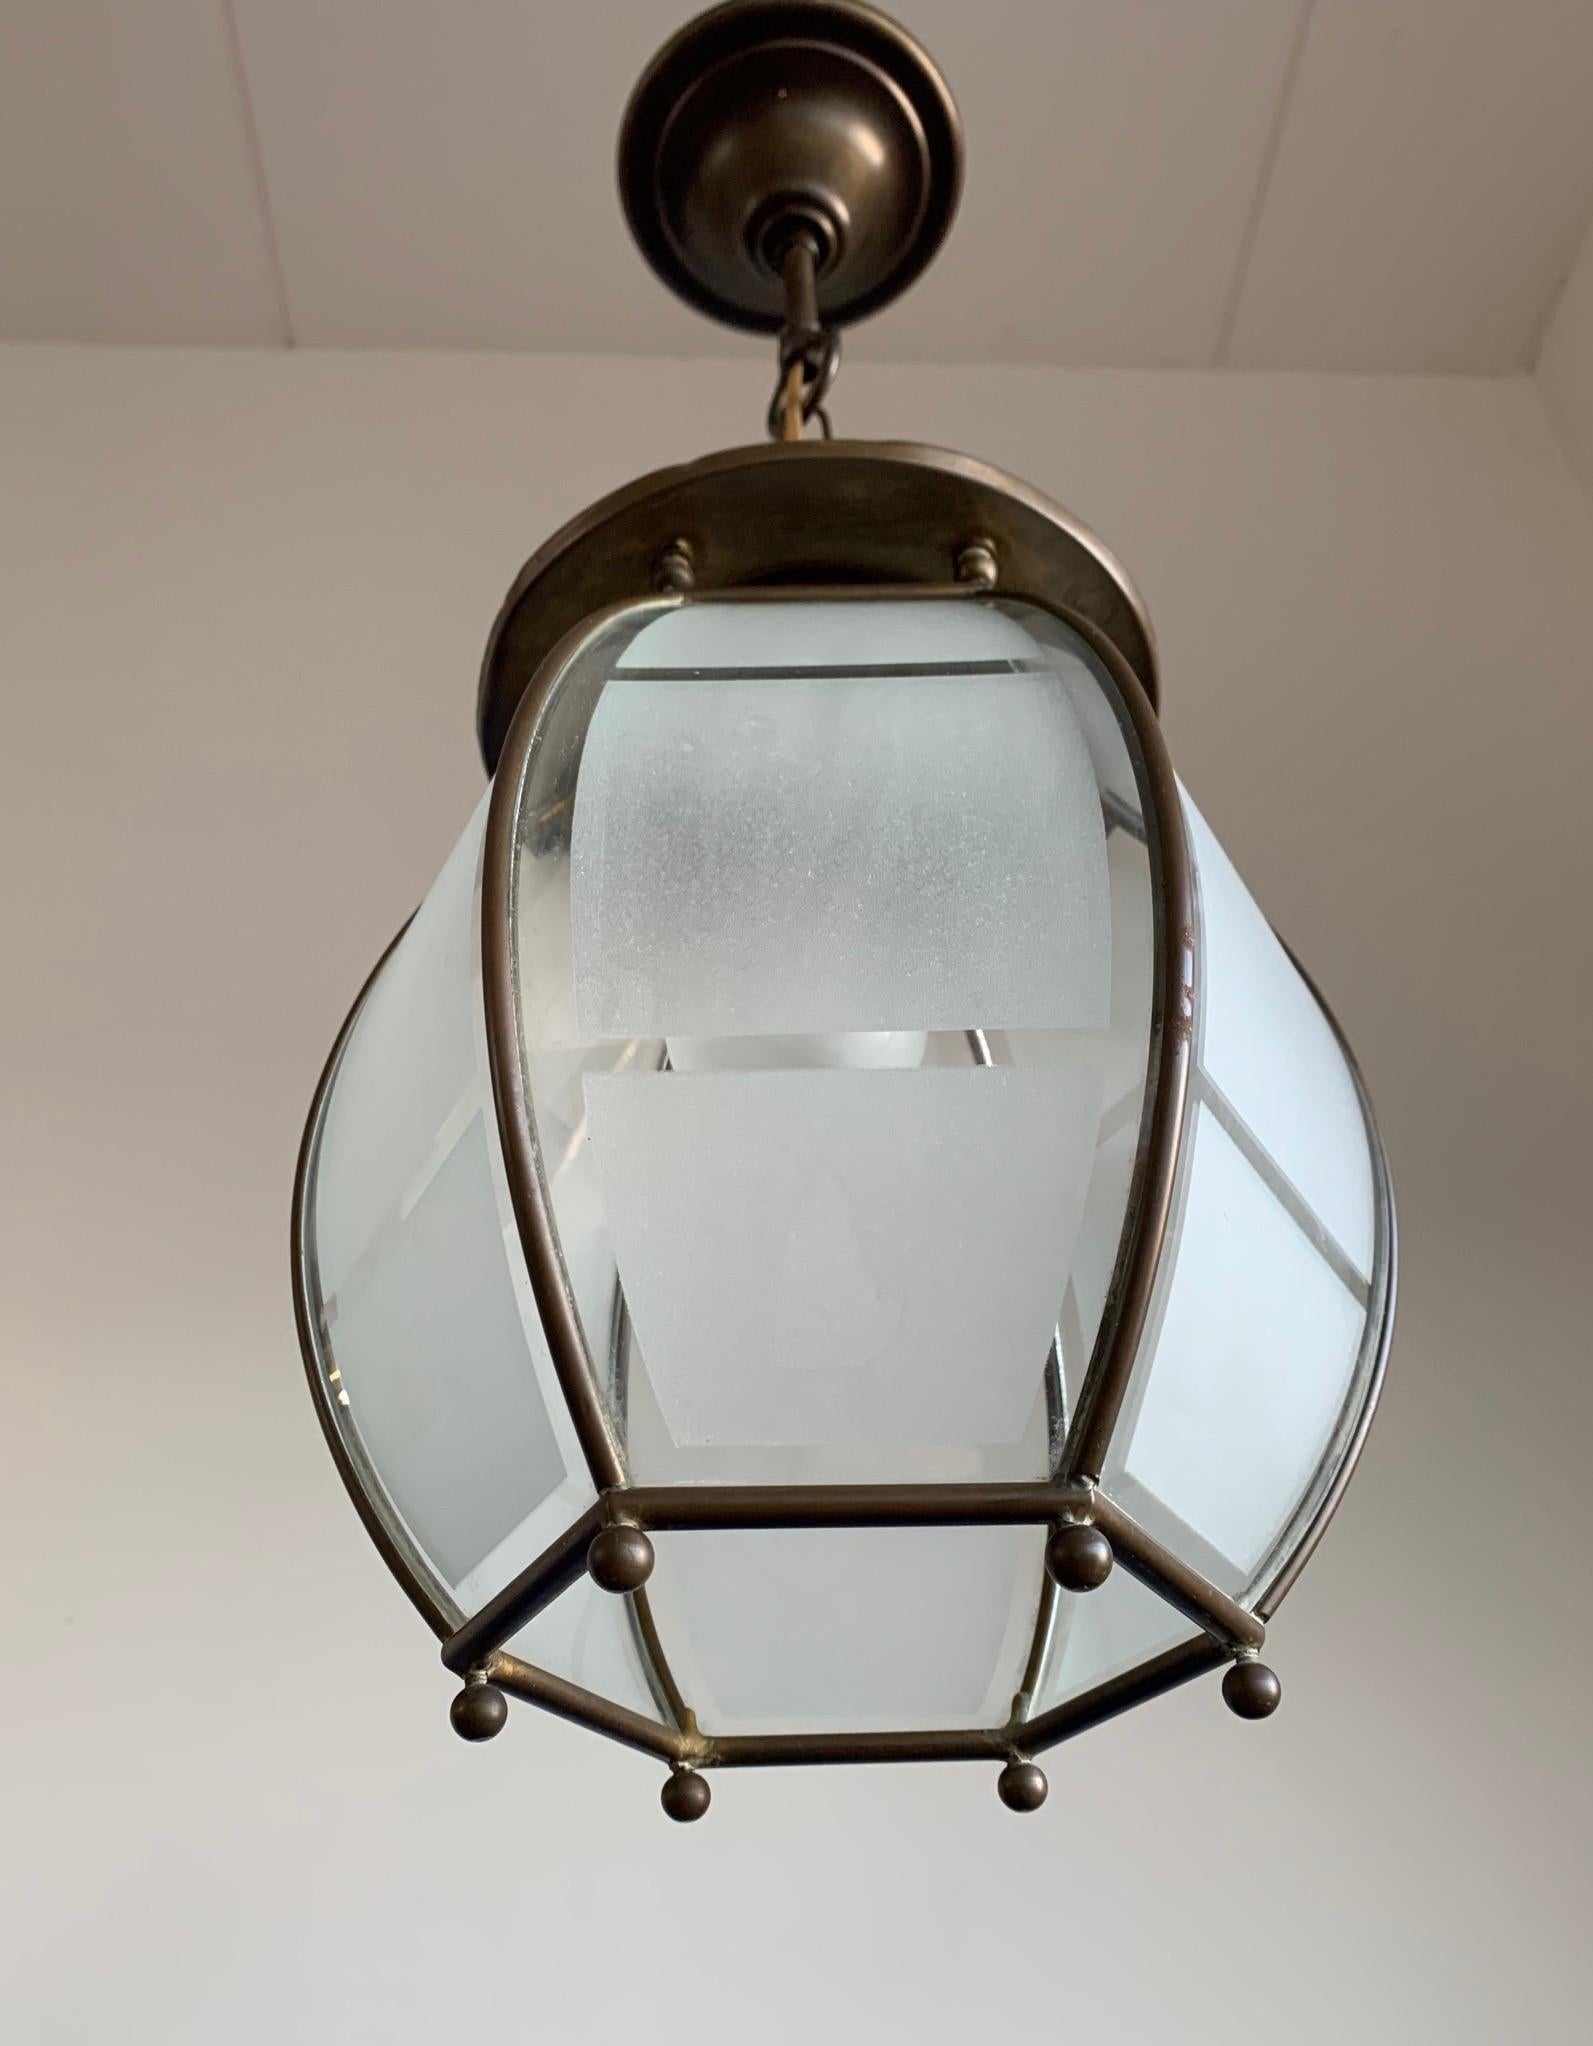 Ideal size and excellent quality pendant.

If you are looking for a beautiful and excellent condition Art Deco light to grace your entry hall or landing then this handcrafted fixture from the early 1900 could be ideal. Also, because it was